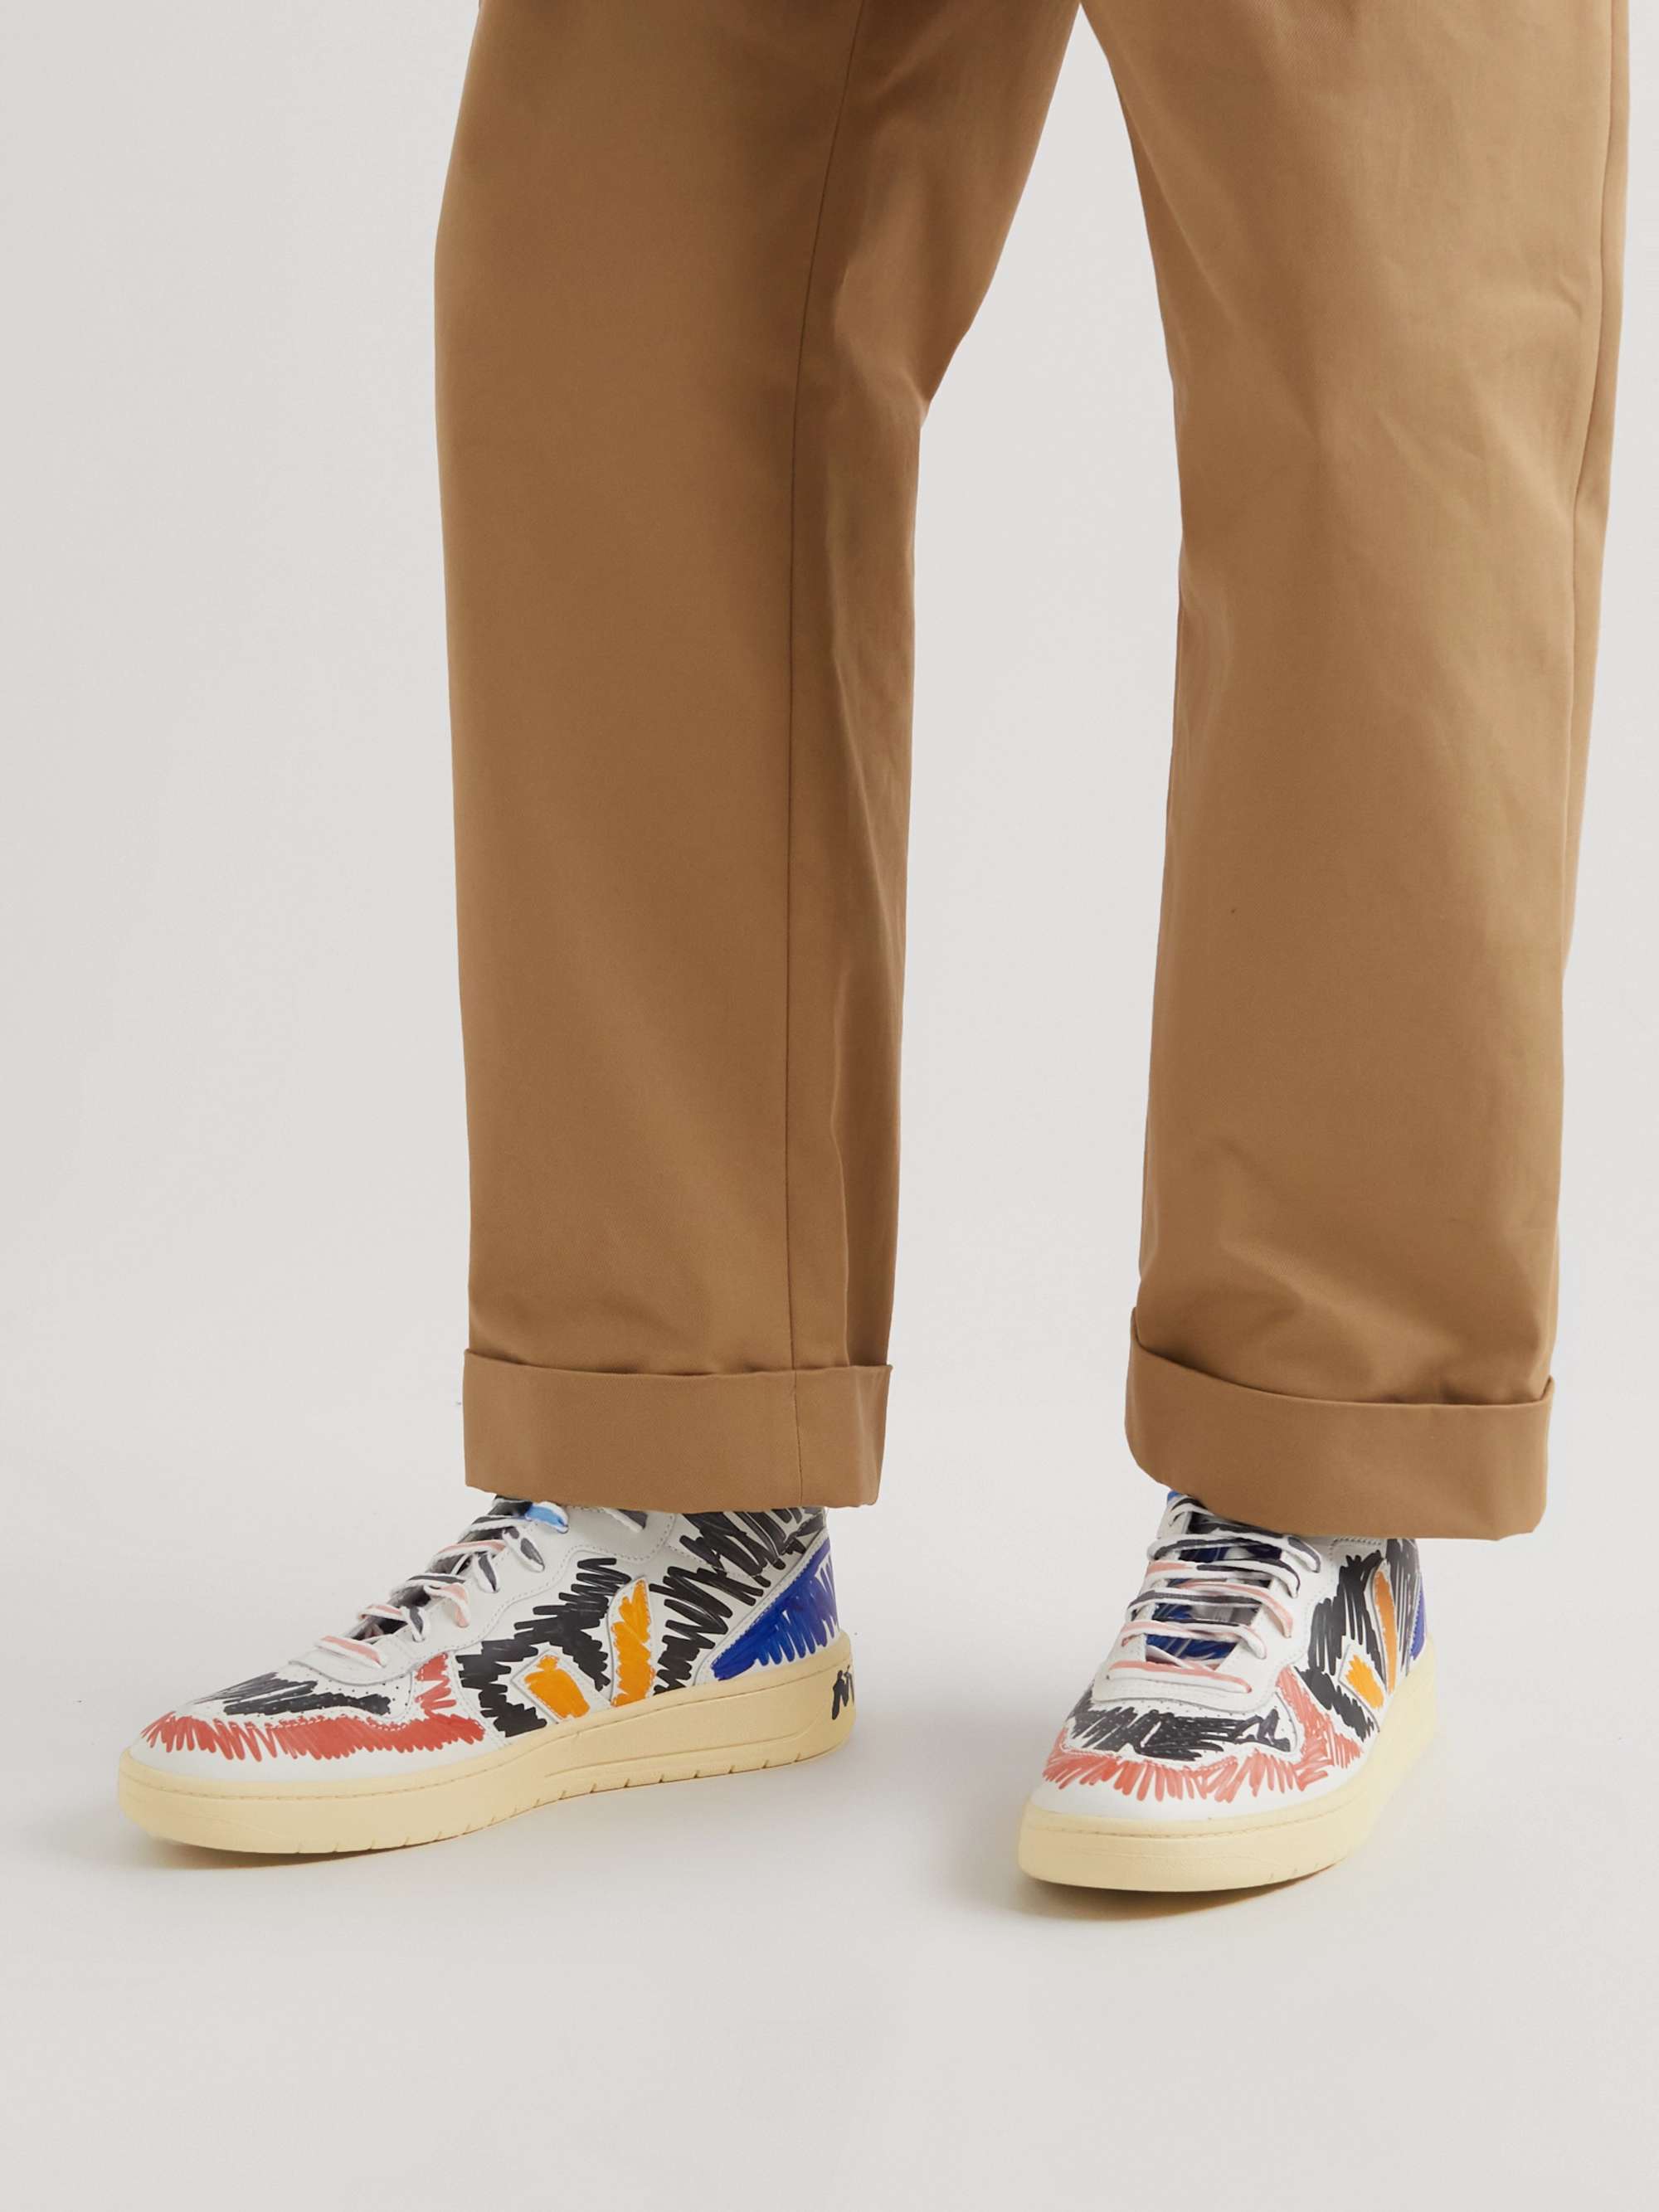 MARNI + Veja V15 Printed Leather High-Top Sneakers